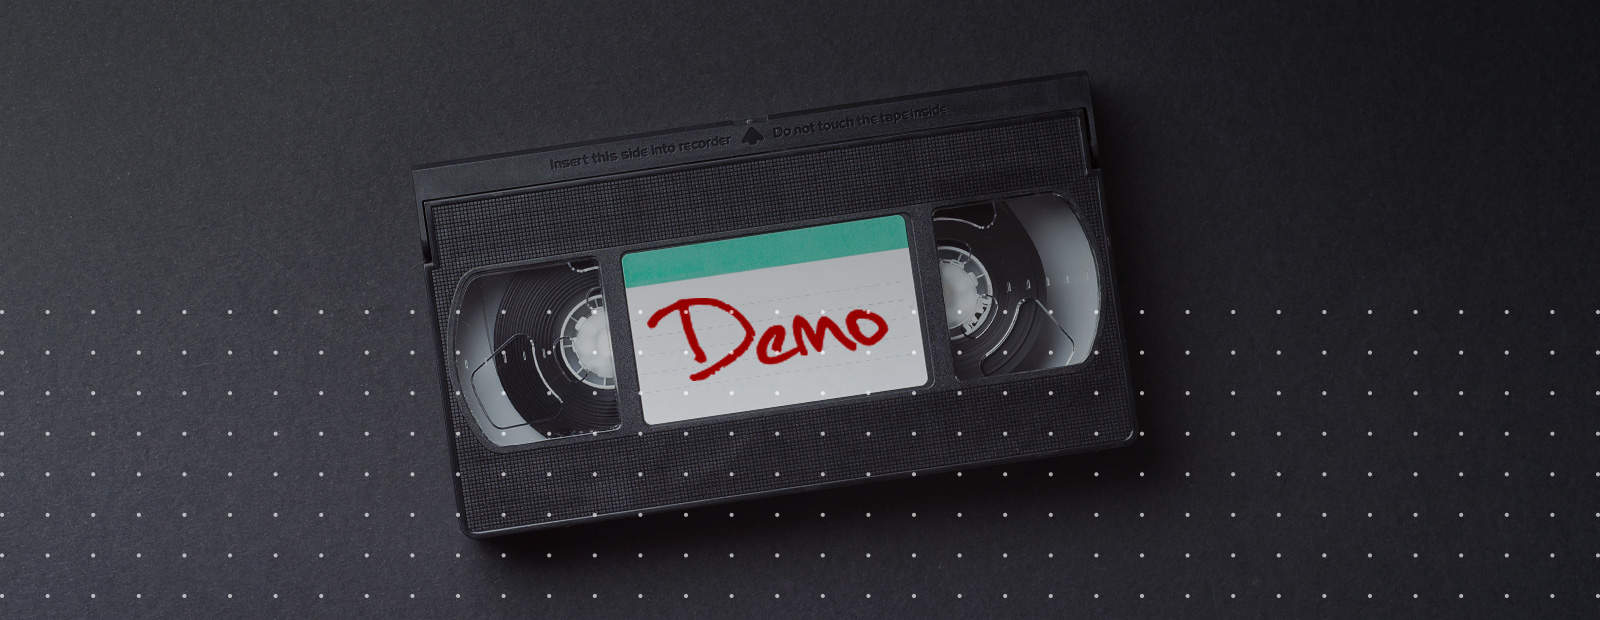 Video focus #5: What makes a good demo video?